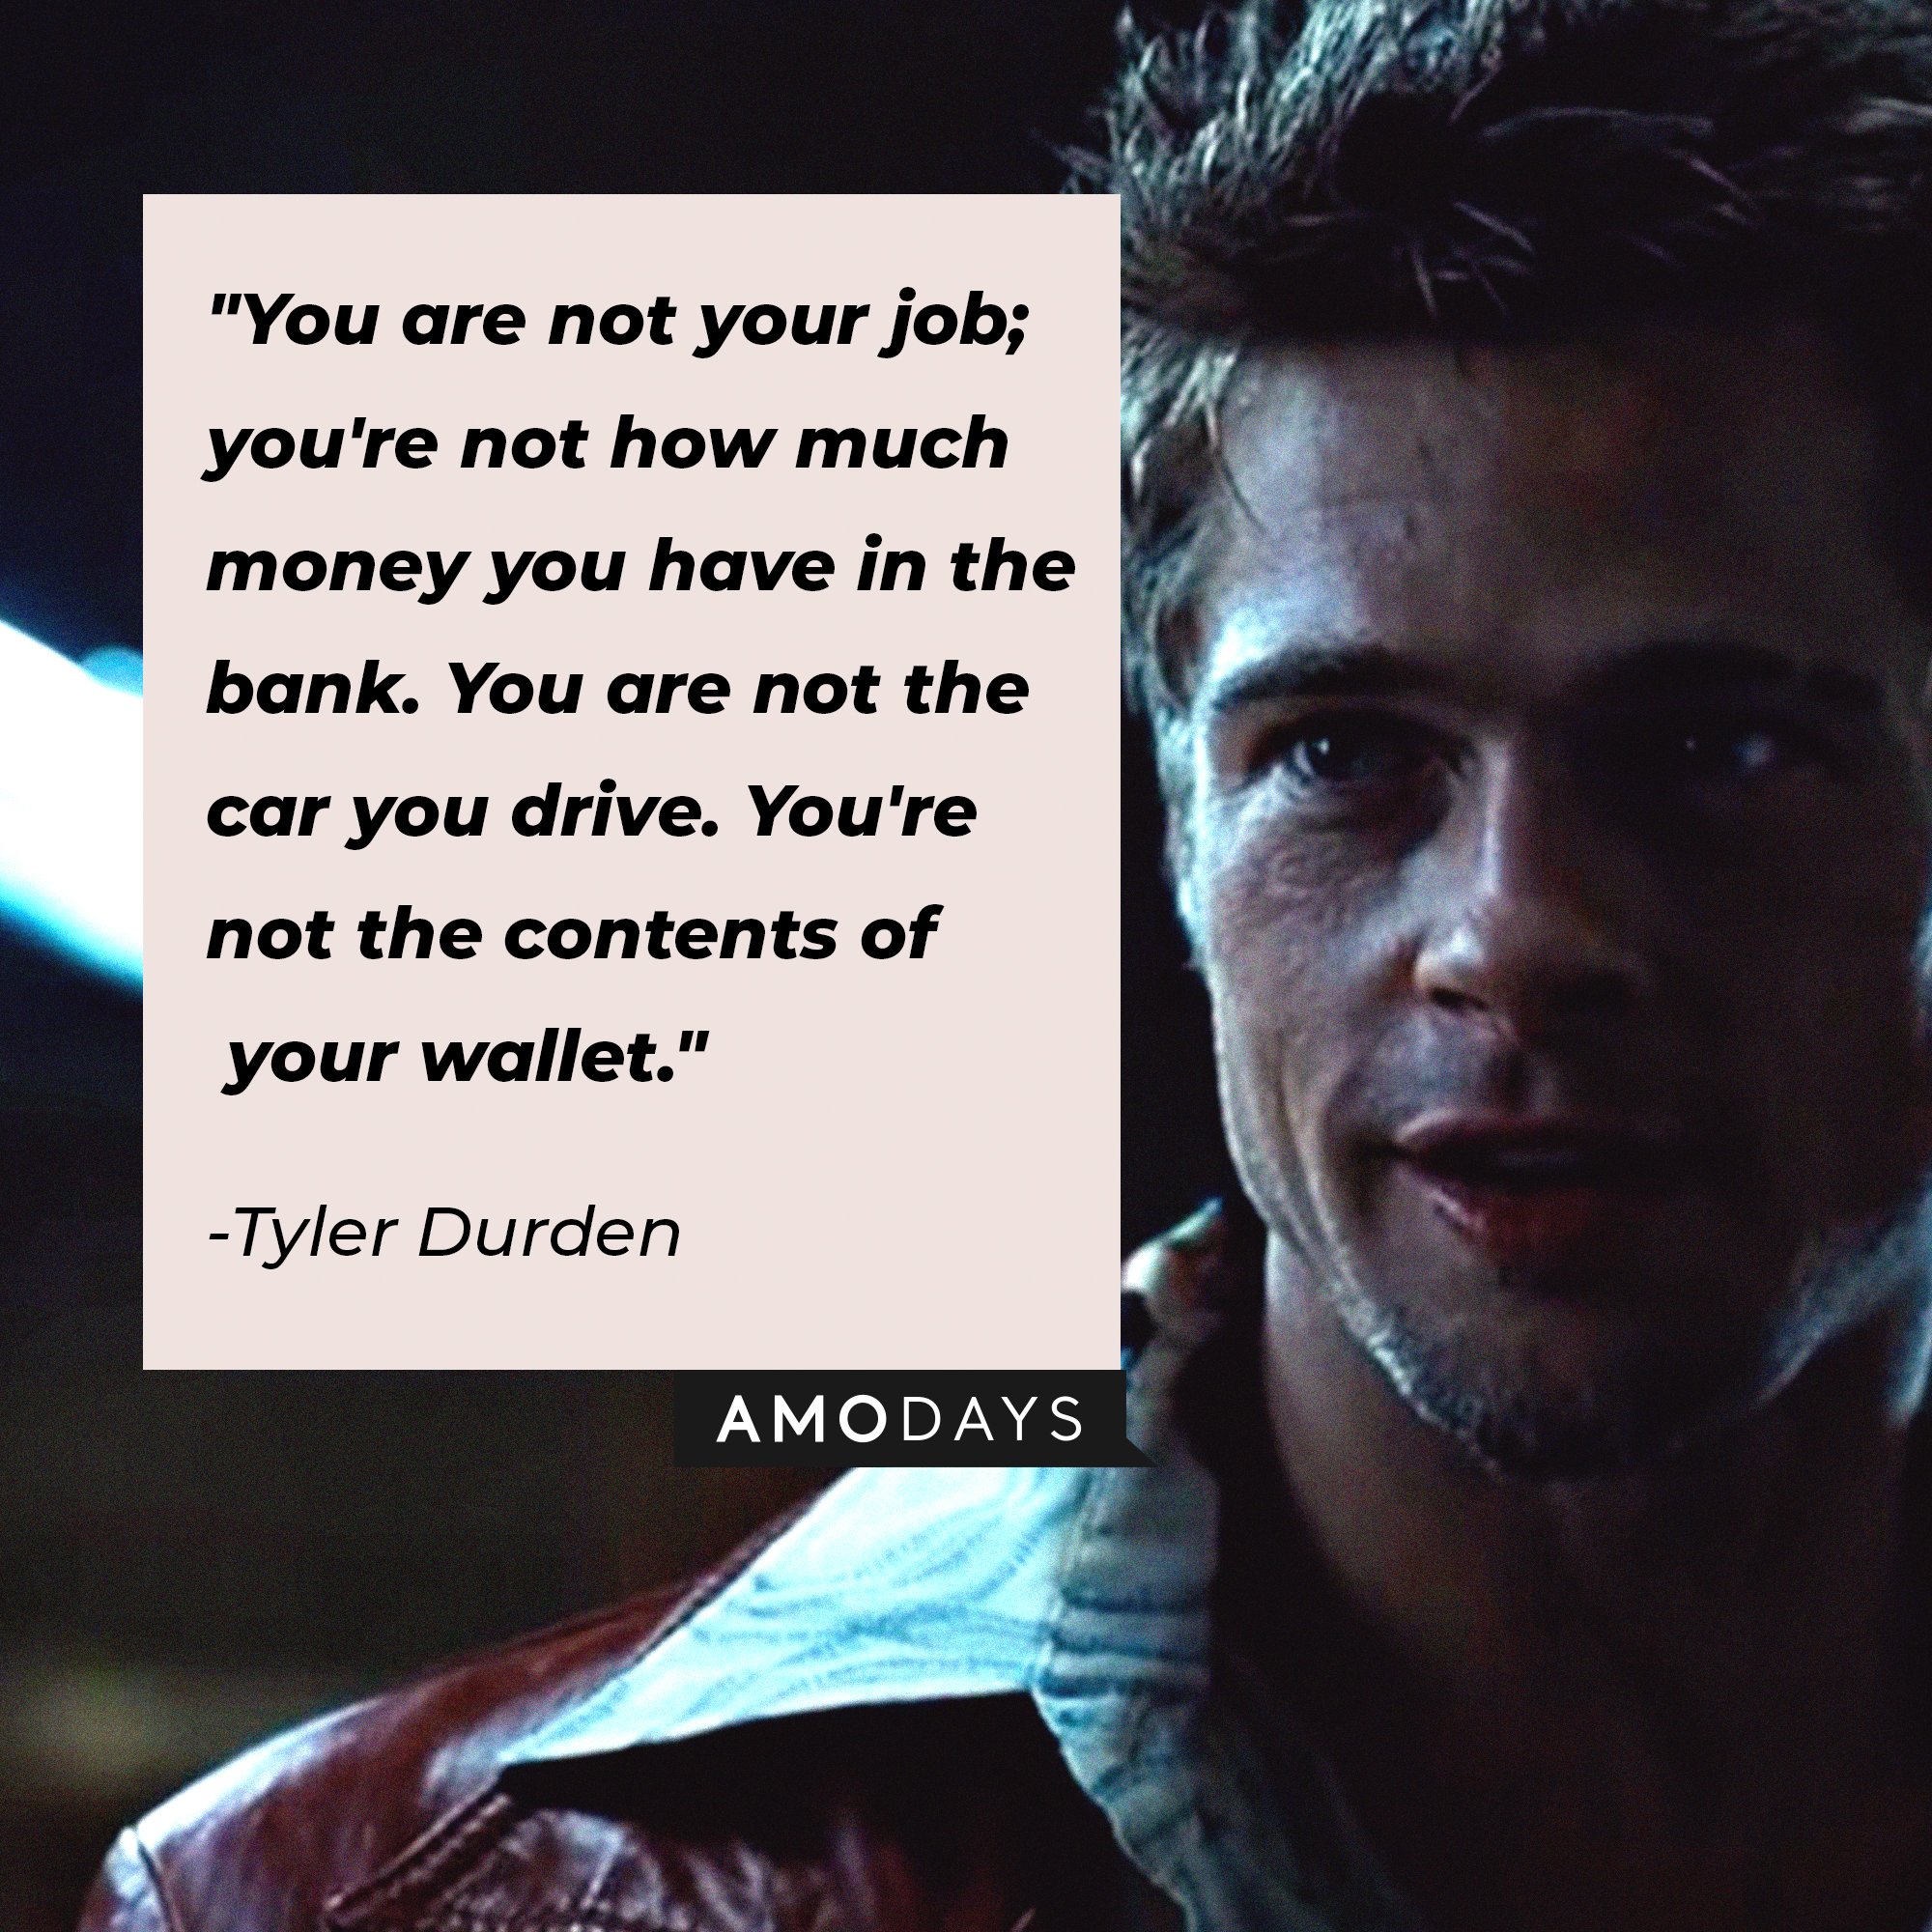  Tyler Durden’s quote: "You are not your job; you're not how much money you have in the bank. You are not the car you drive. You're not the contents of your wallet." | Image: AmoDays